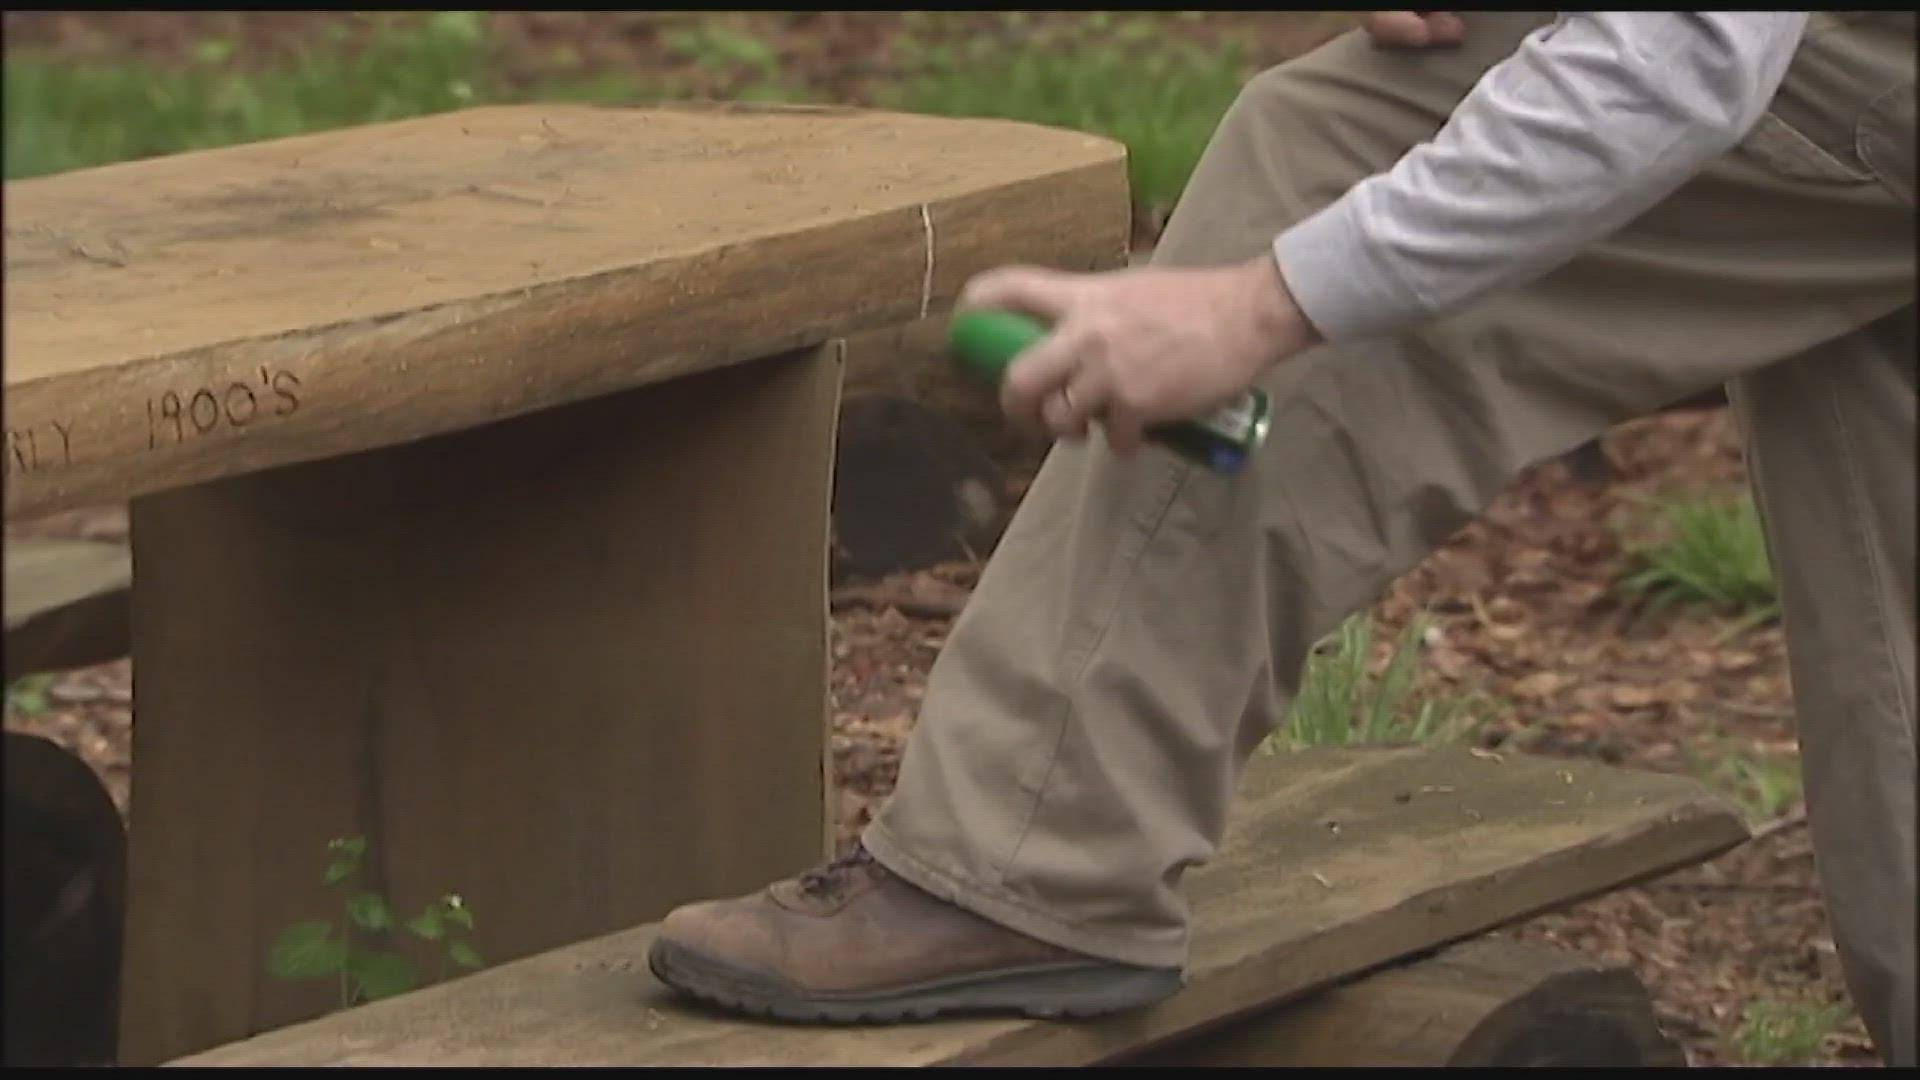 It's mosquito season in Northeast Ohio. With the help of Consumer Reports, Monica Robins takes a look at which treatments are the most effective.